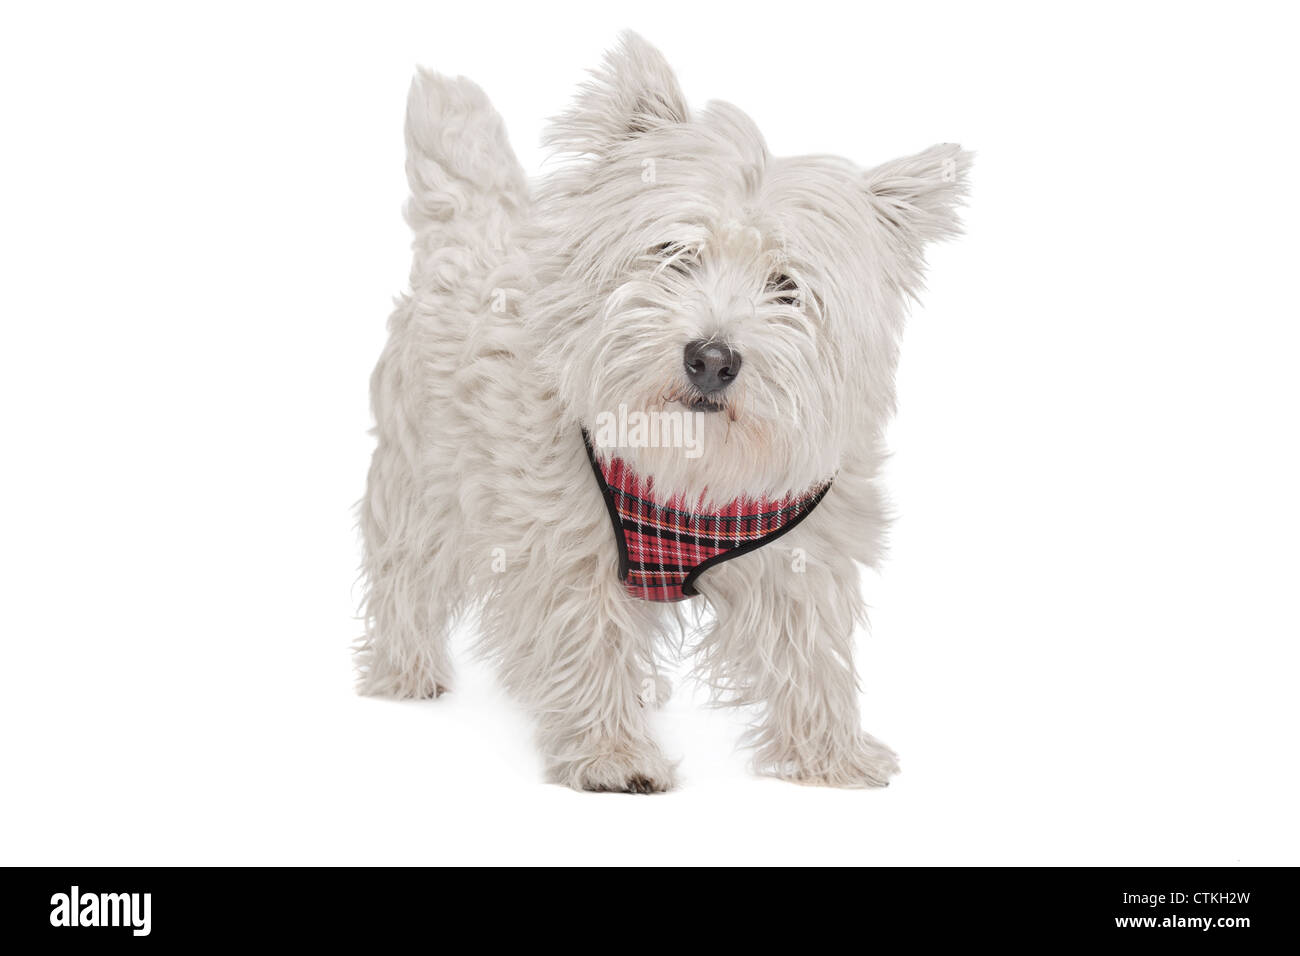 West Highland White Terrier in front of a white background Stock Photo